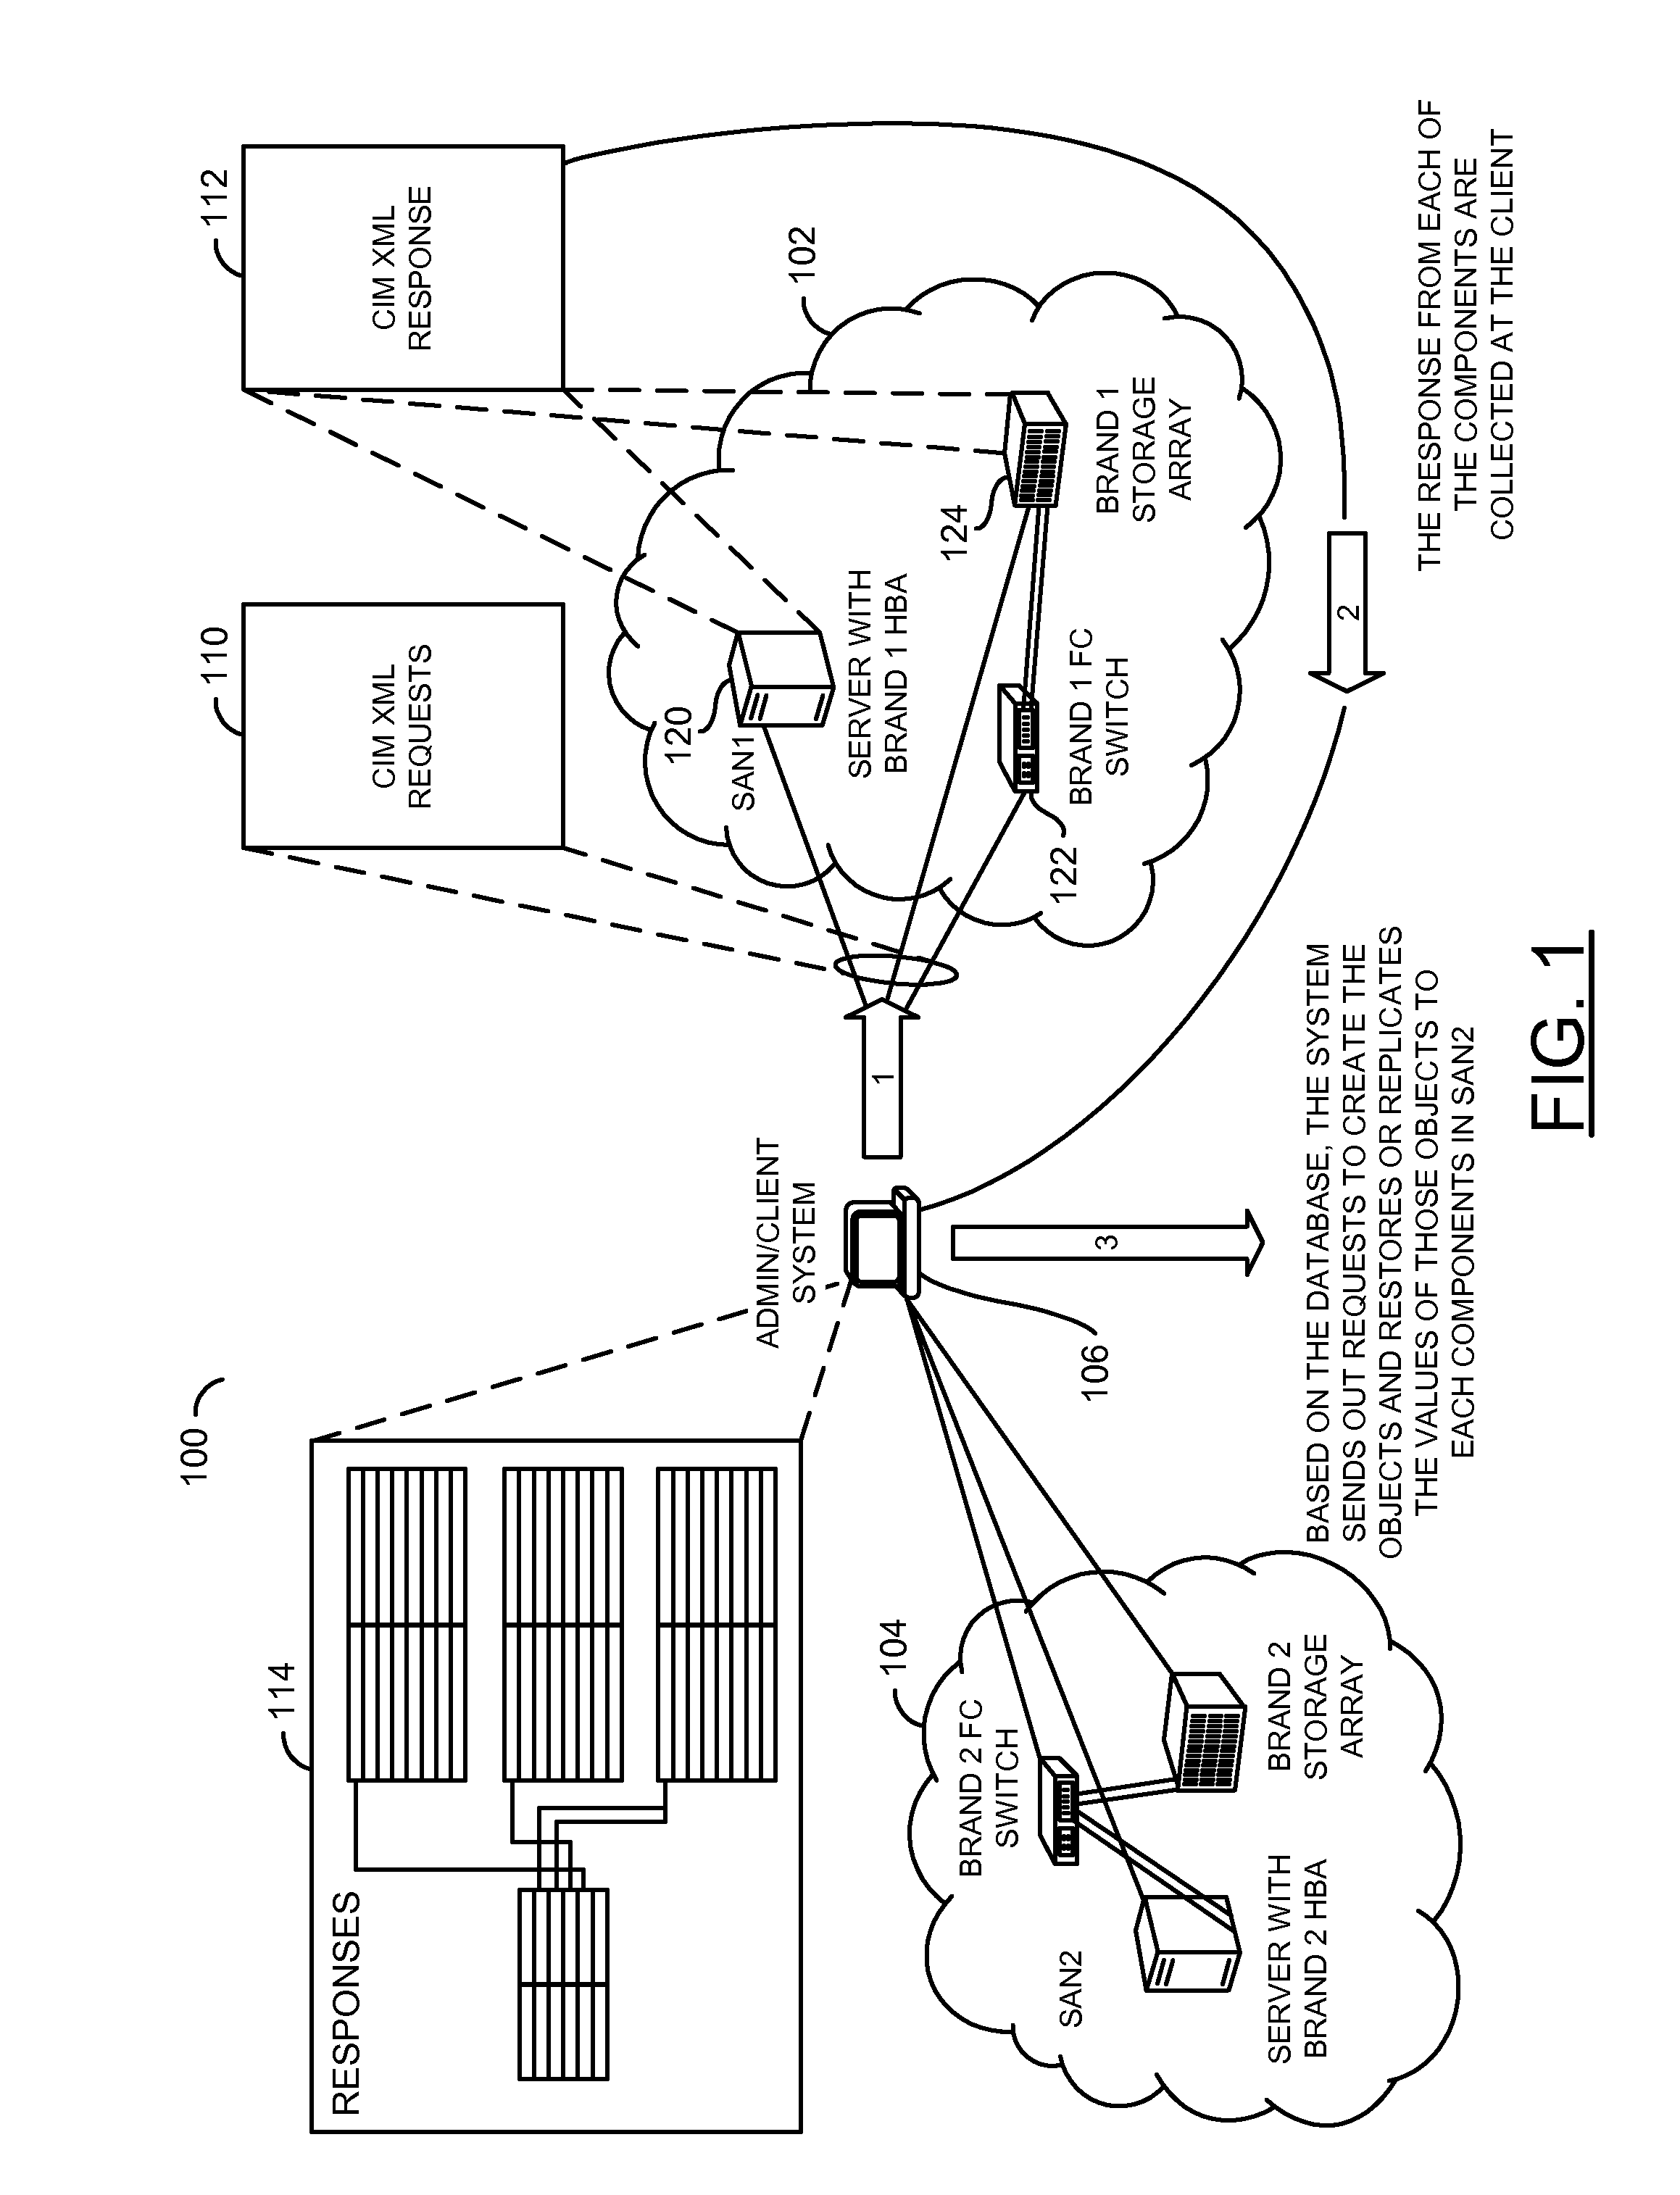 Backup, restore, and/or replication of configuration settings in a storage area network environment using a management interface